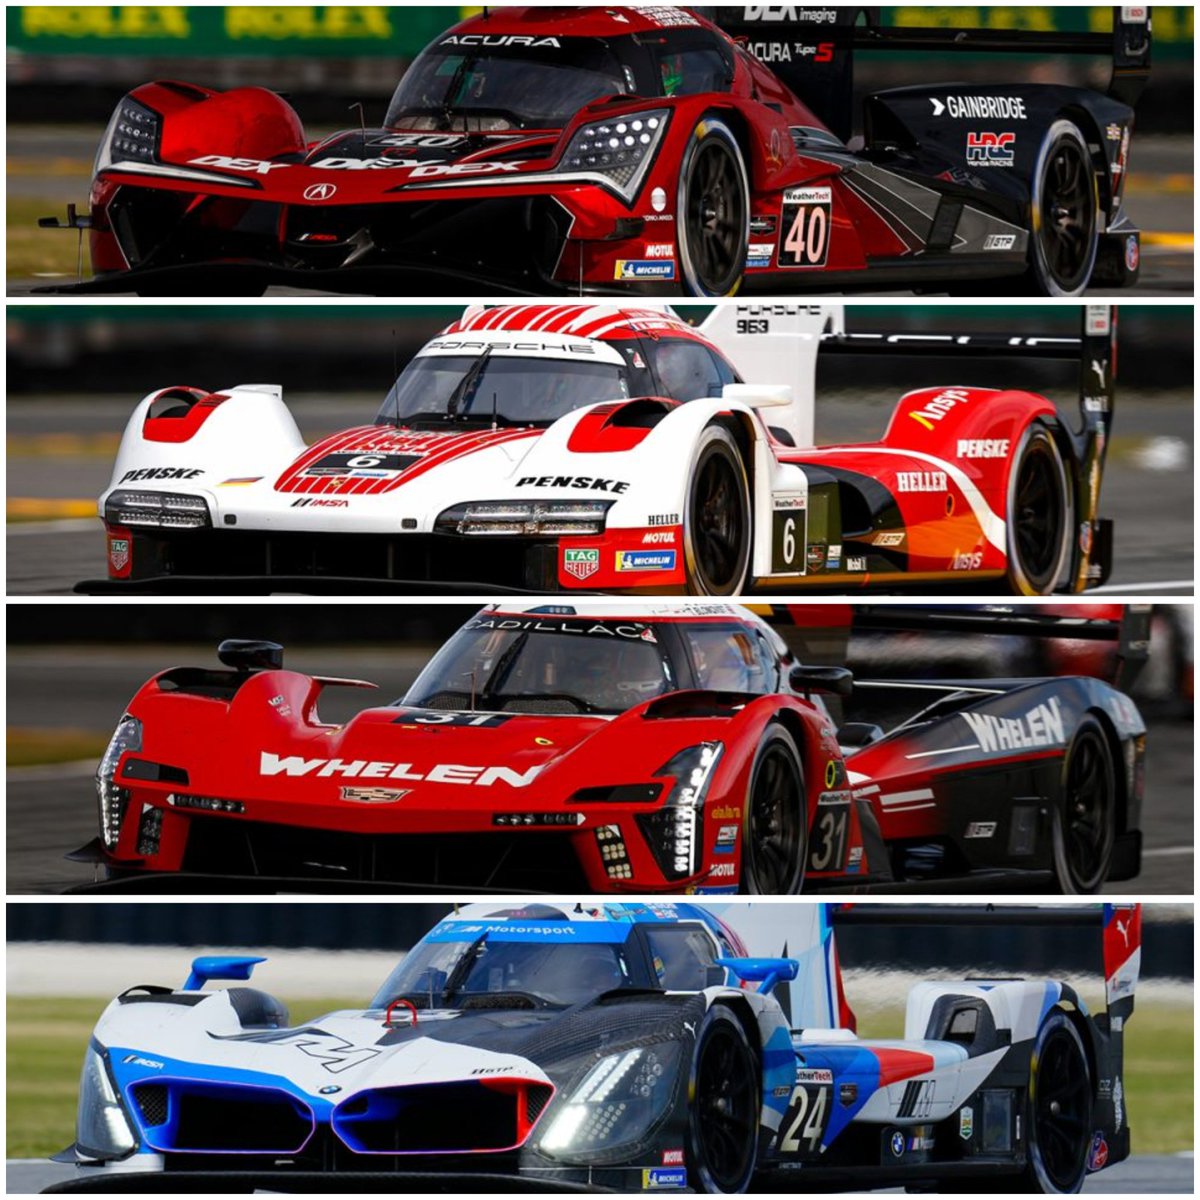 The total of overall victories for each manufacturer since the start of the GTP era in #IMSA in 2023.

4⃣  Acura
4⃣  Porsche
2⃣  Cadillac
1⃣  BMW